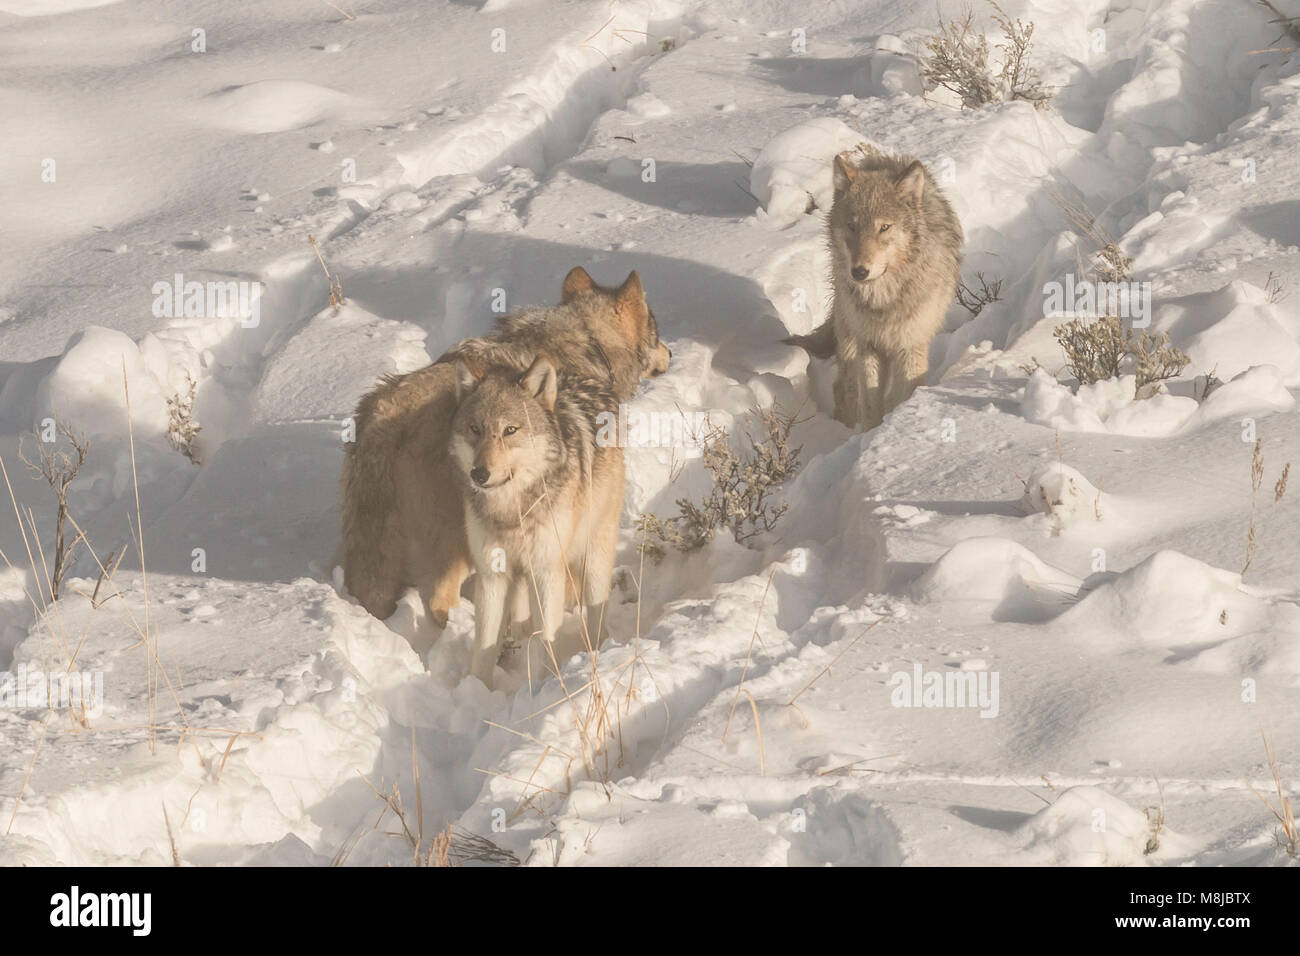 Wolves from the Wapiti Lake pack in Yellowstone National Park moments after the bison they were hunting swam away. Stock Photo